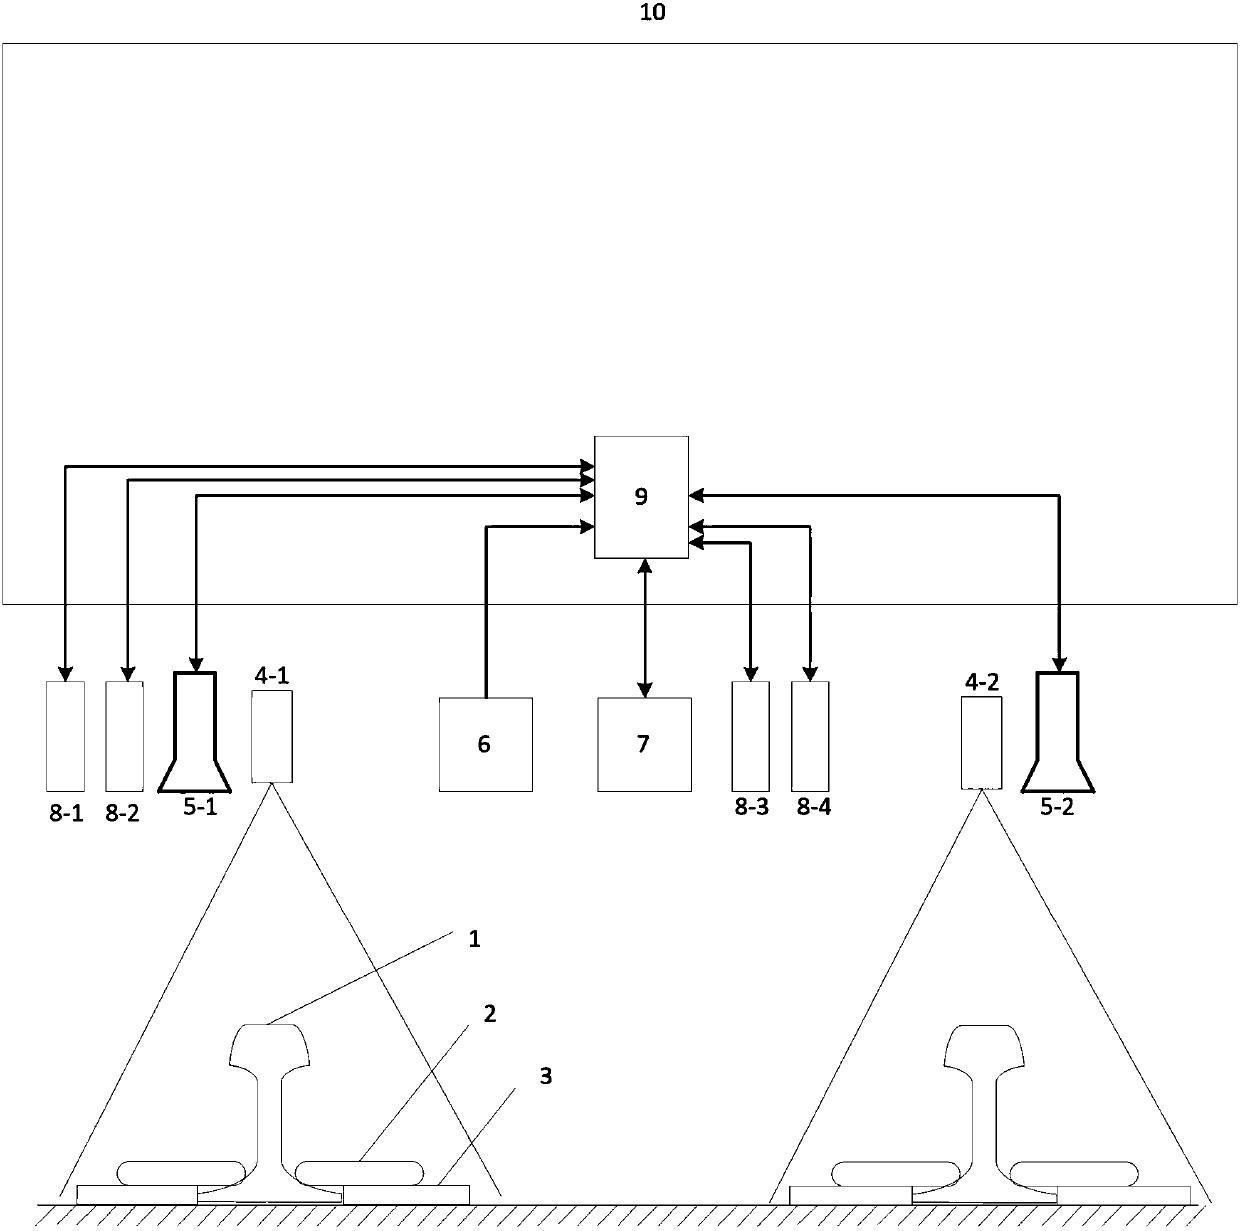 Railway fastener abnormality detection system based on monocular vision and laser speckles